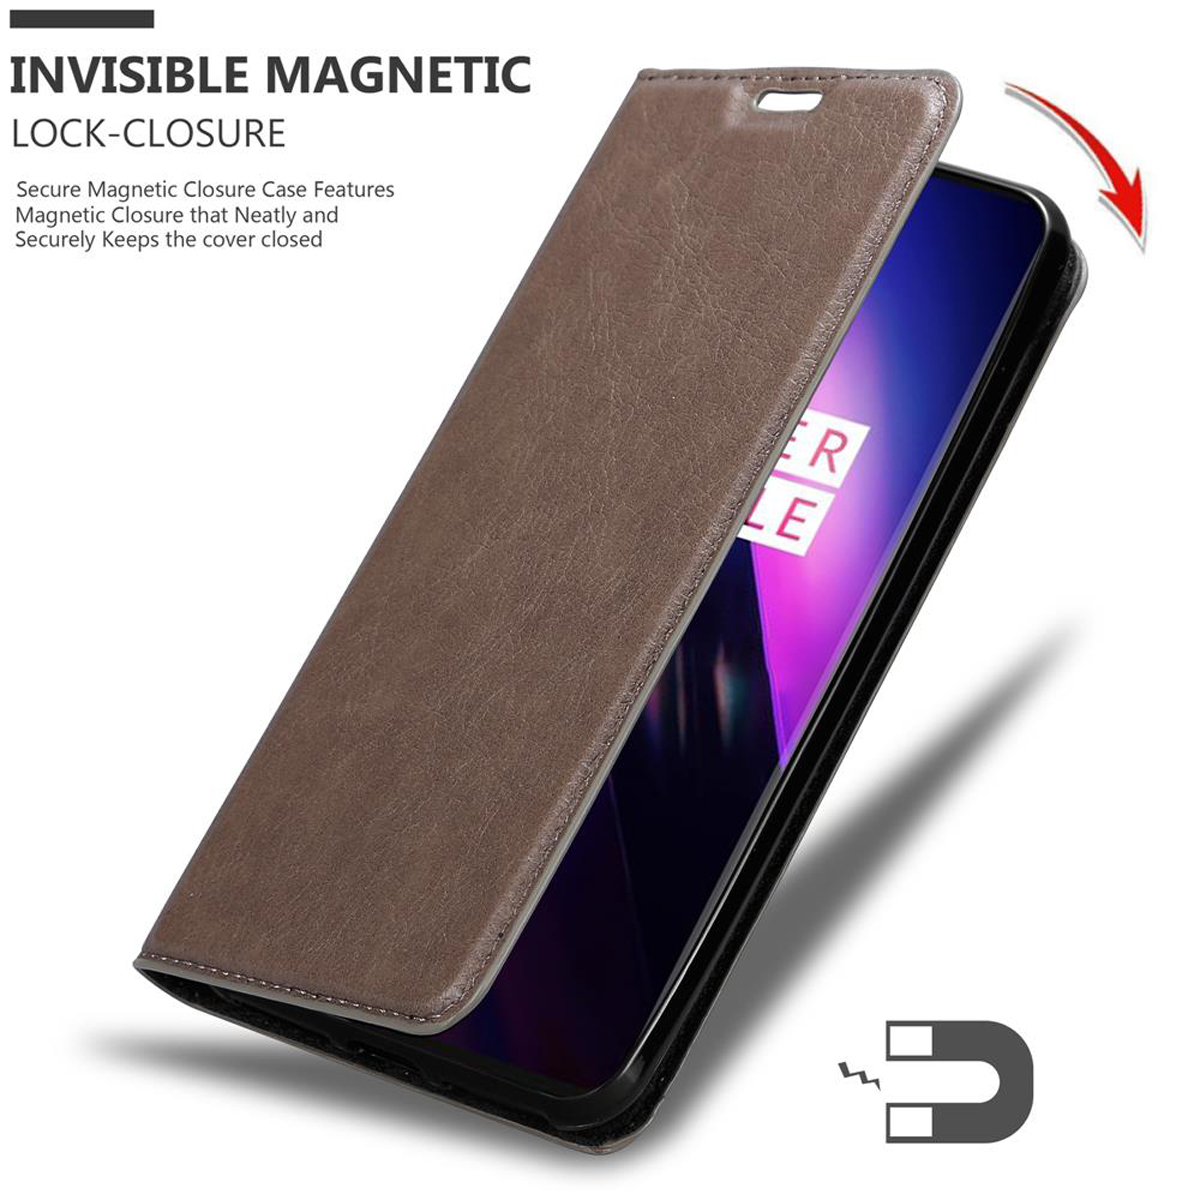 OnePlus, BRAUN Magnet, Bookcover, CADORABO 8, Invisible Book KAFFEE Hülle